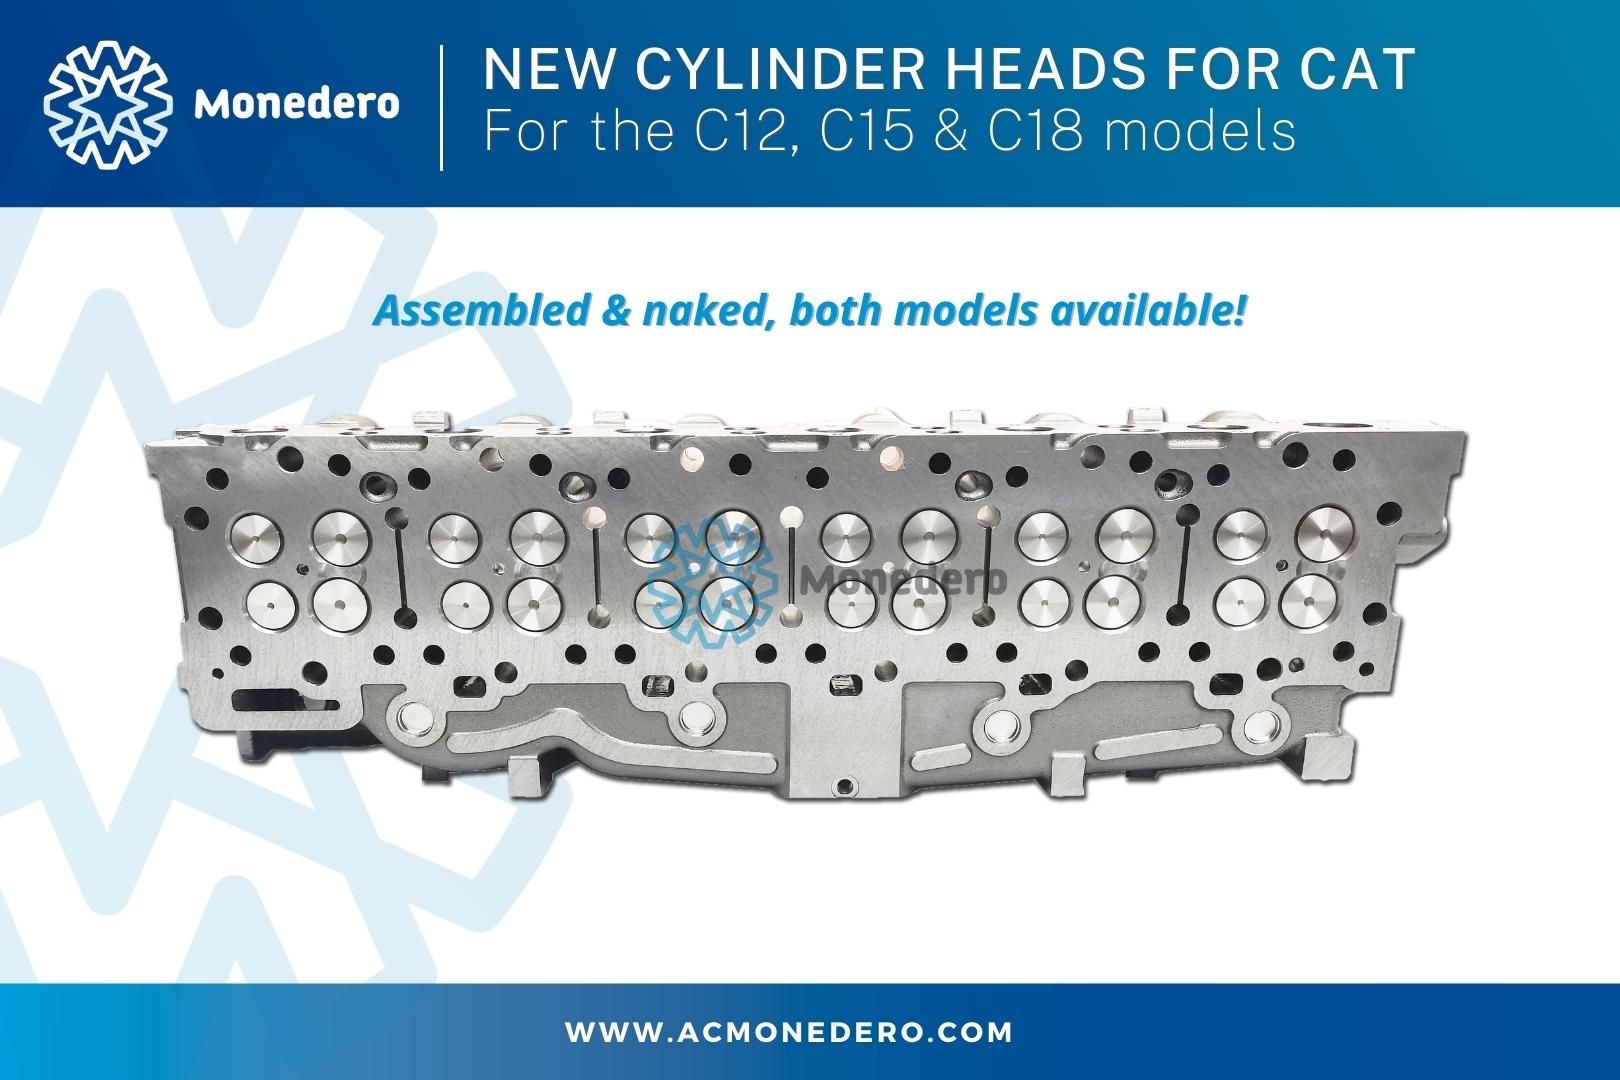 The new Monedero cylinder heads for Caterpillar C18, C15 and C12 application